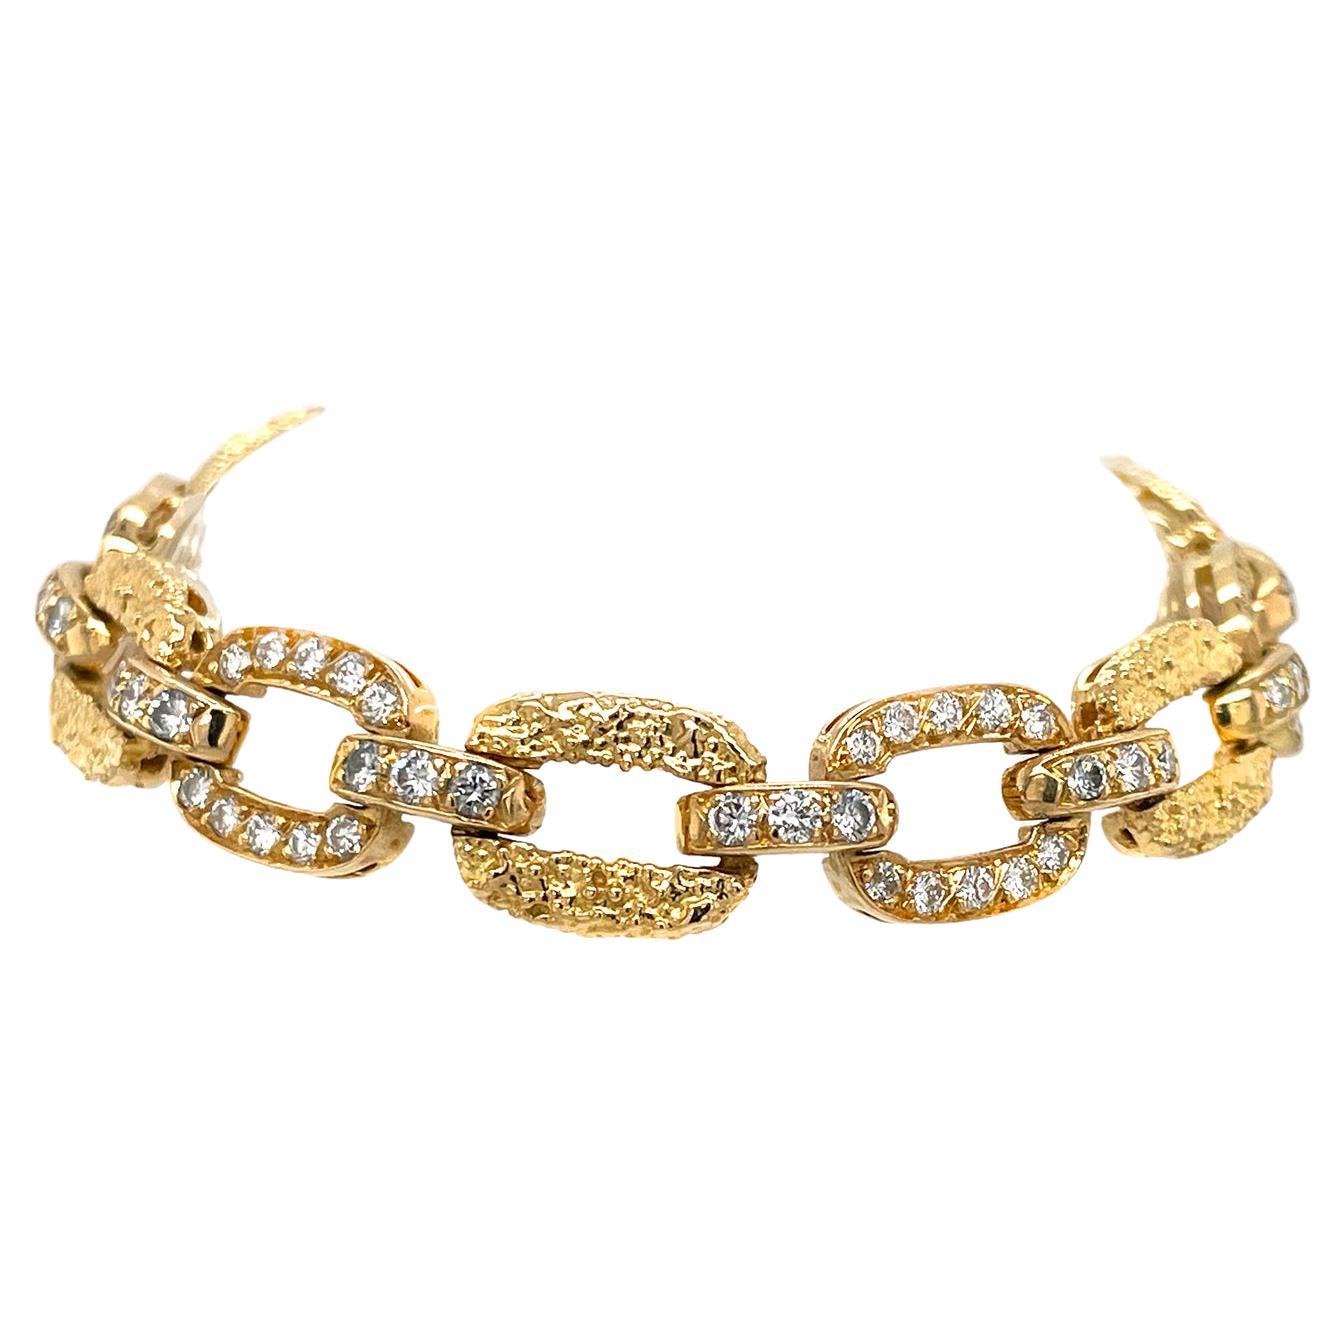 Van Cleef and Arpels Diamond and Textured Gold Bracelet, ca. 1940s For Sale